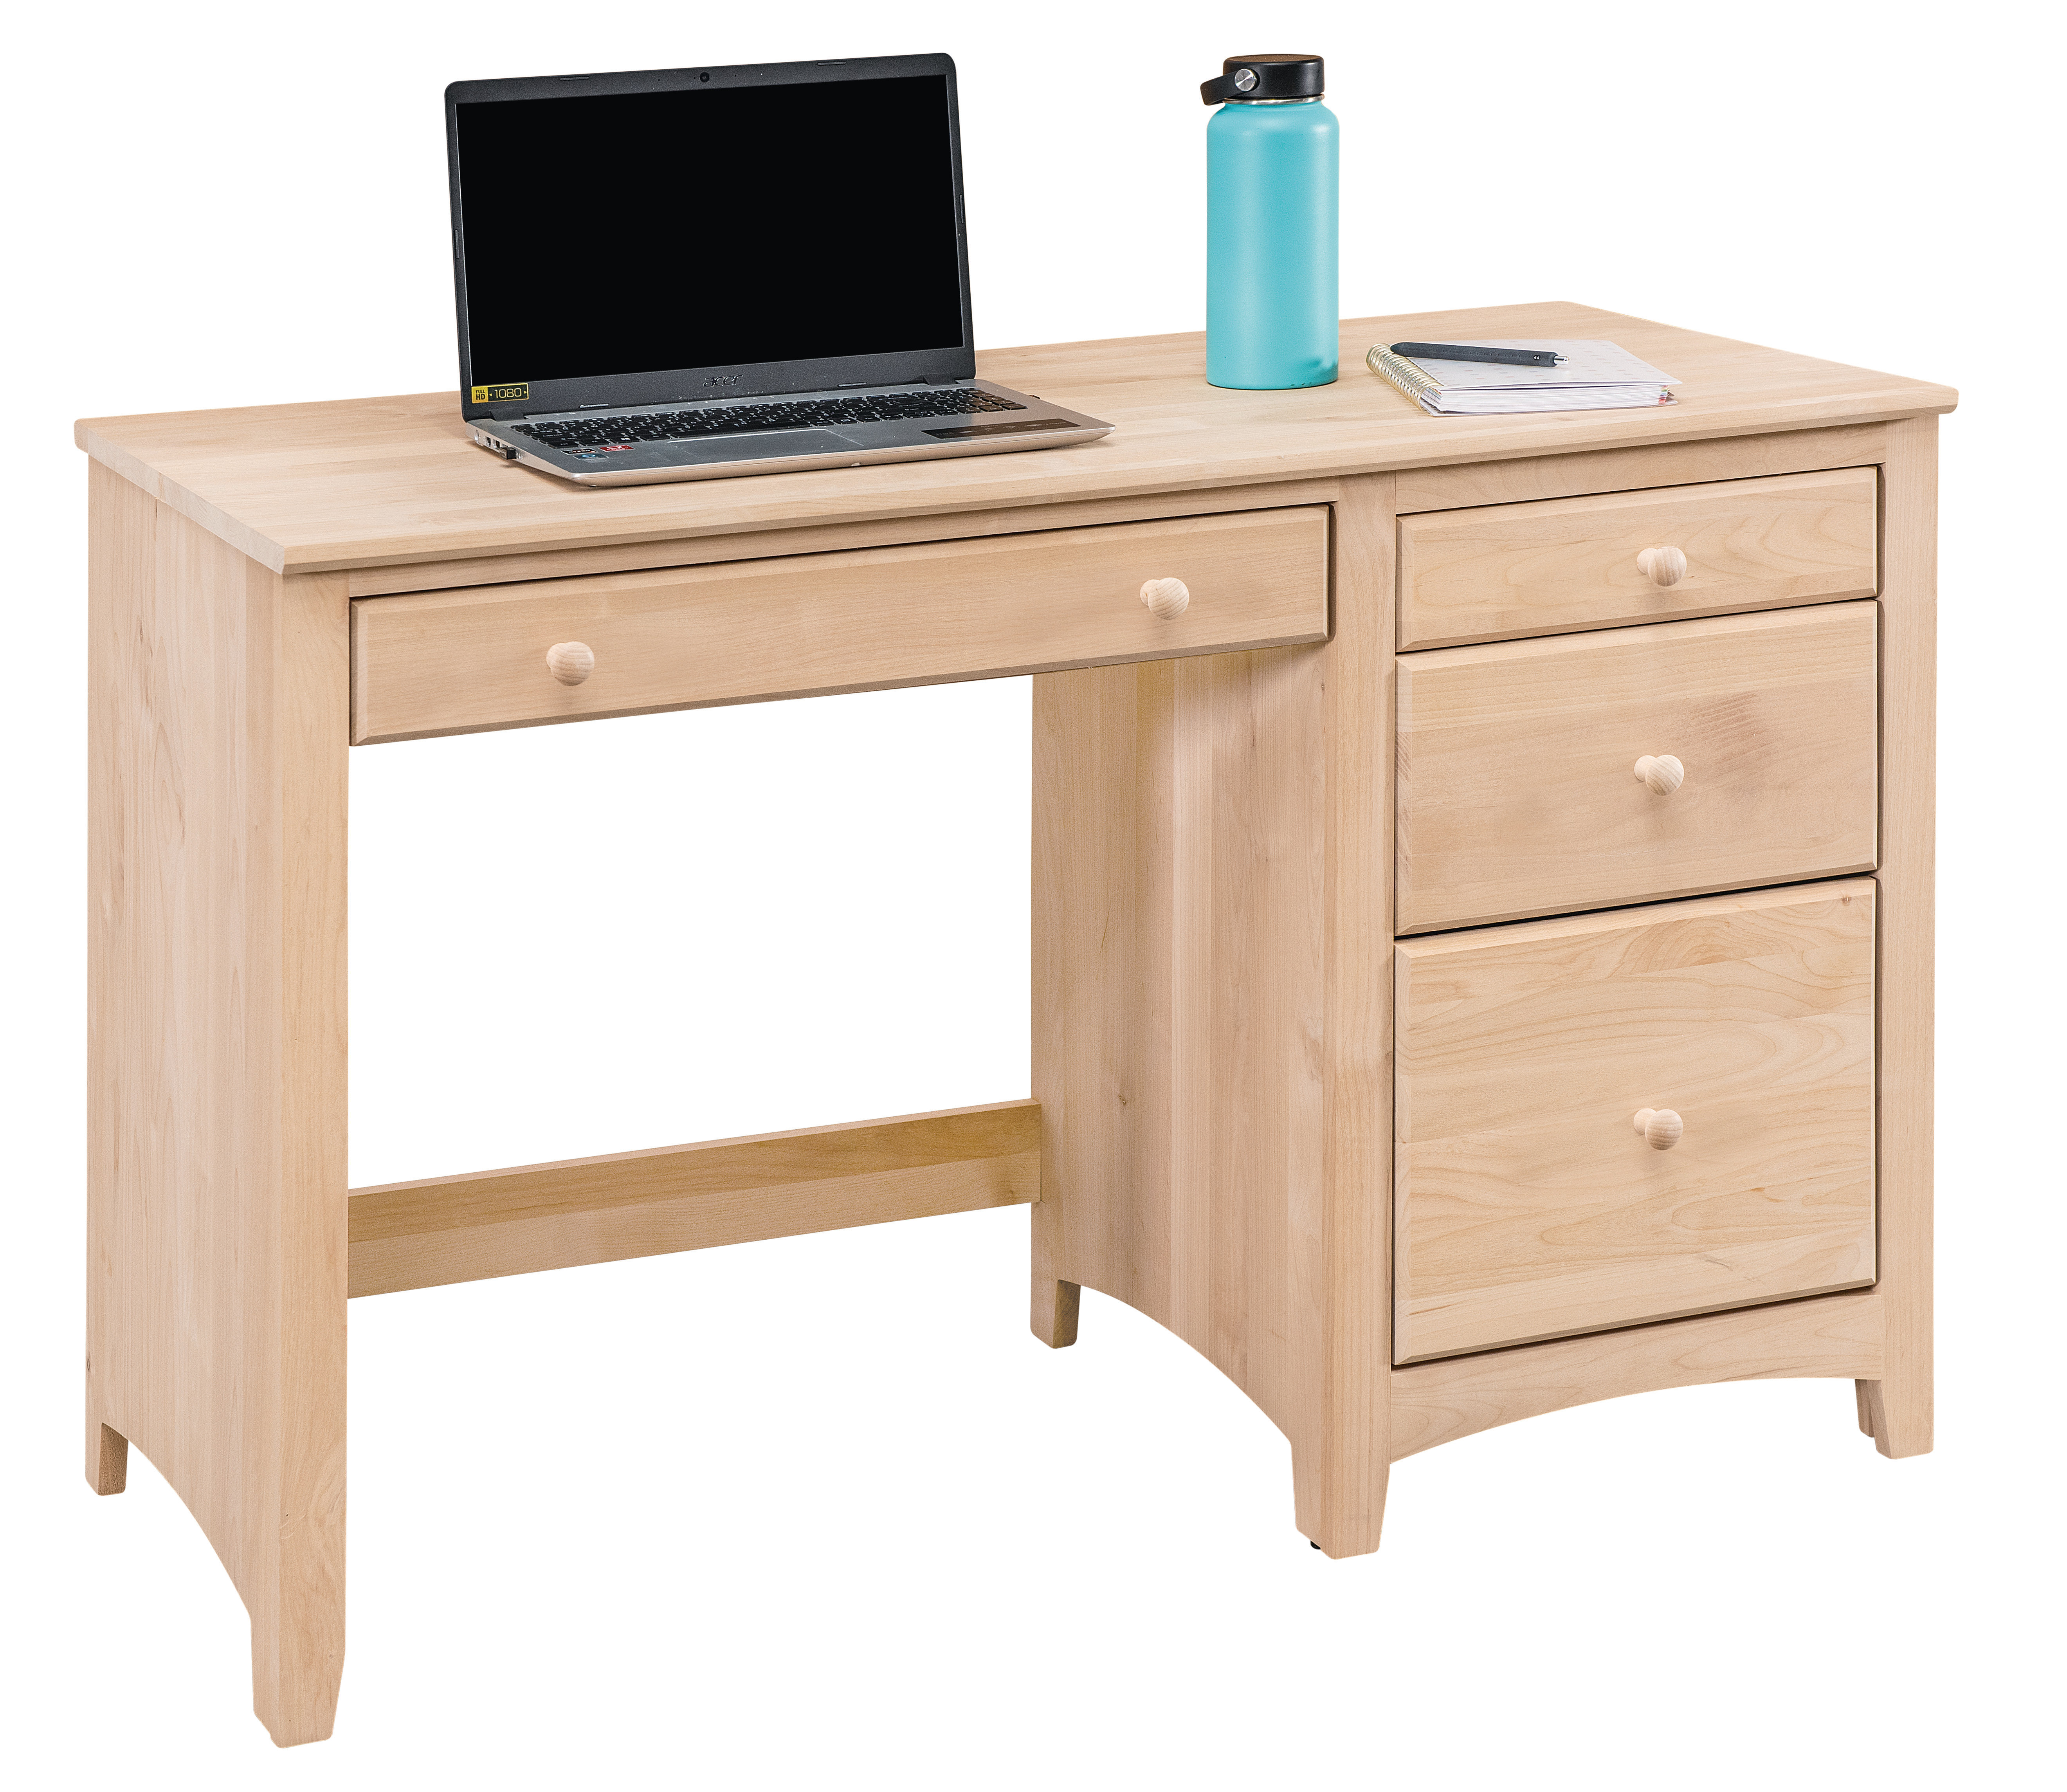 Malani 4 Drawer Solid Wood Desk Foundry Select Color: Unfinished